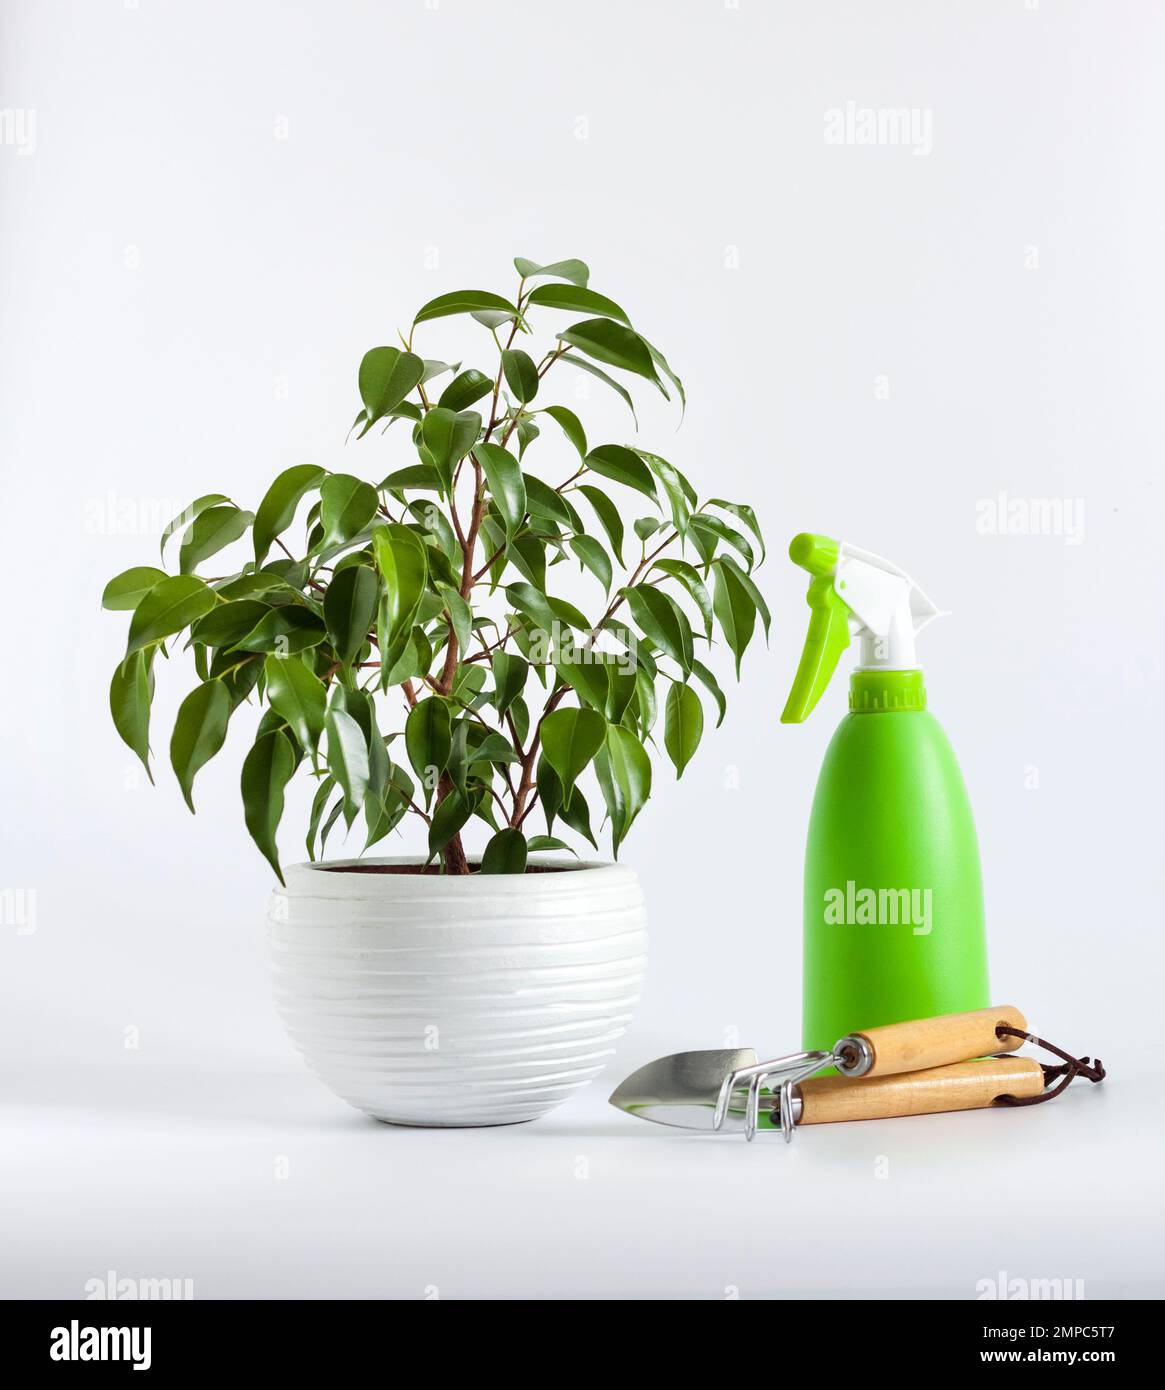 Potted Ficus benjamina plant and green spray bottle on white background. Houseplant care Stock Photo